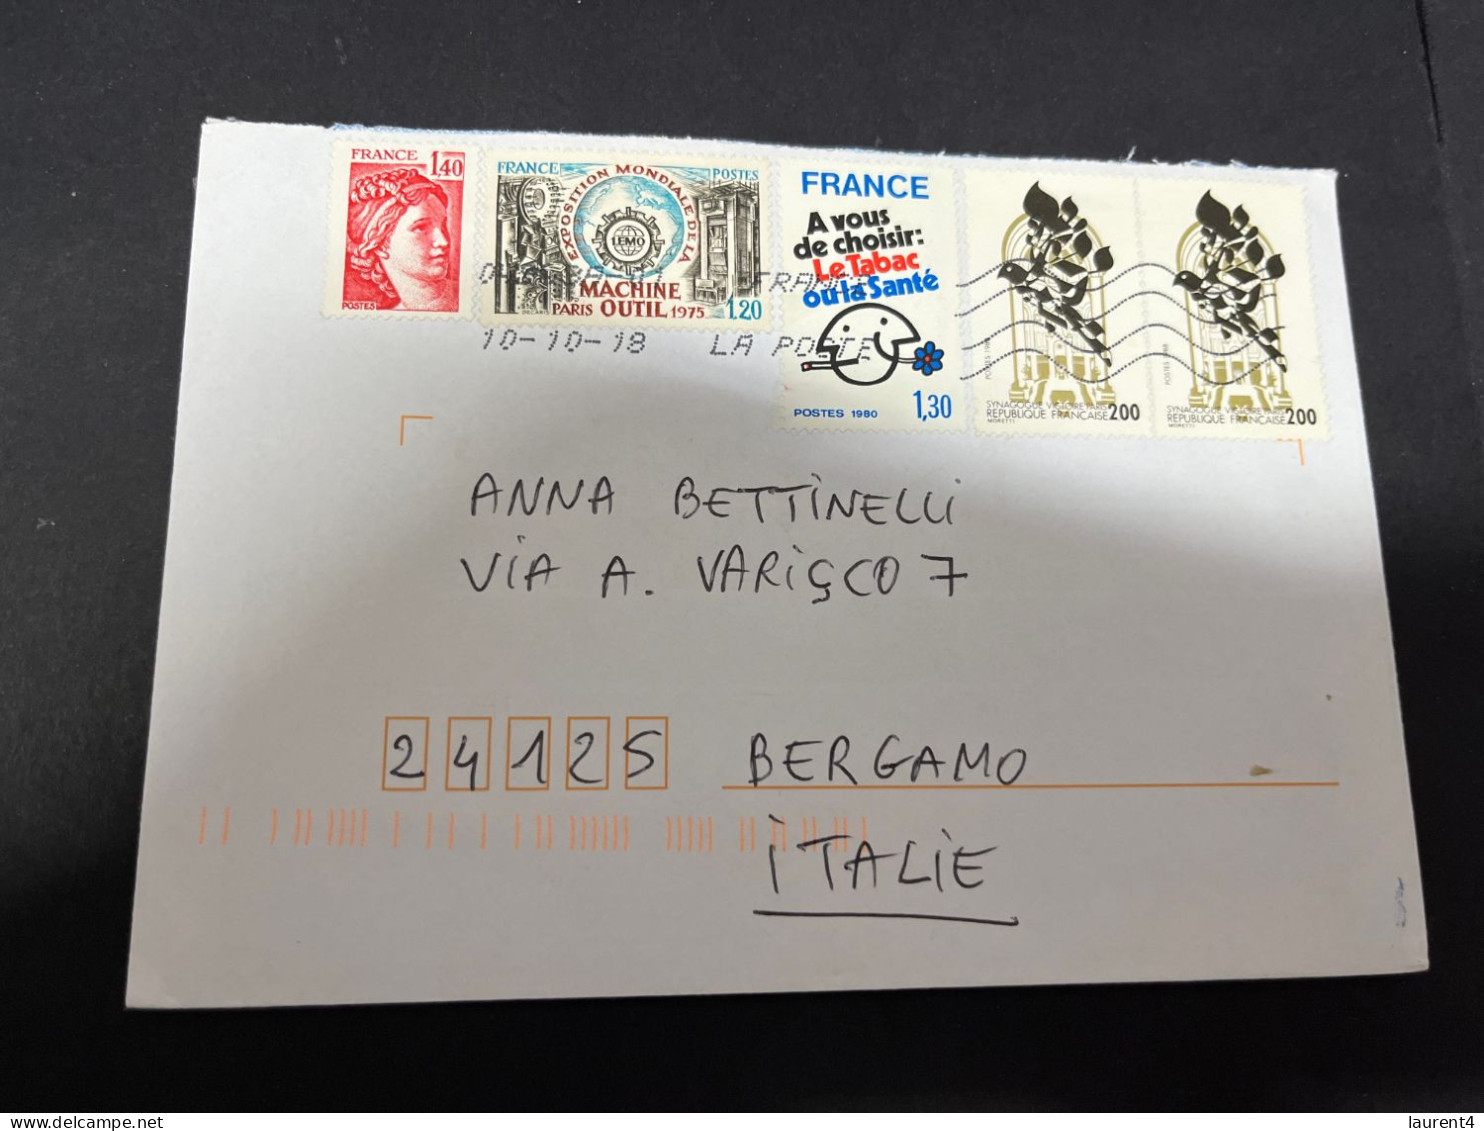 25-3-2024 (4 Y 4) 2 Letter Posted From France To Italy (with Many Stamps - 1 No Postmark) - Storia Postale